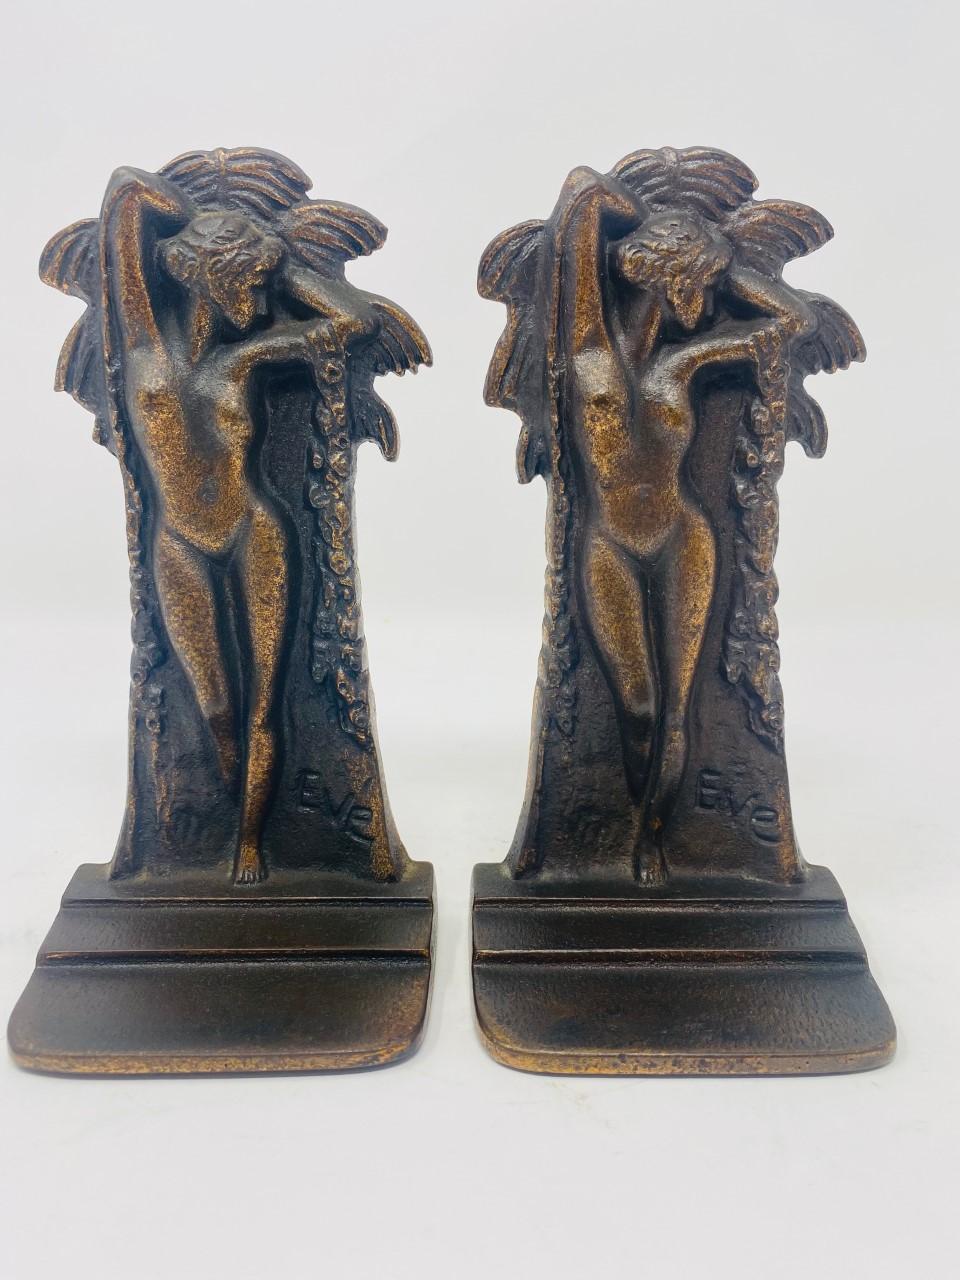 Vintage Art Nouveau “Eve” Bookends 1930s by Verona In Good Condition For Sale In San Diego, CA